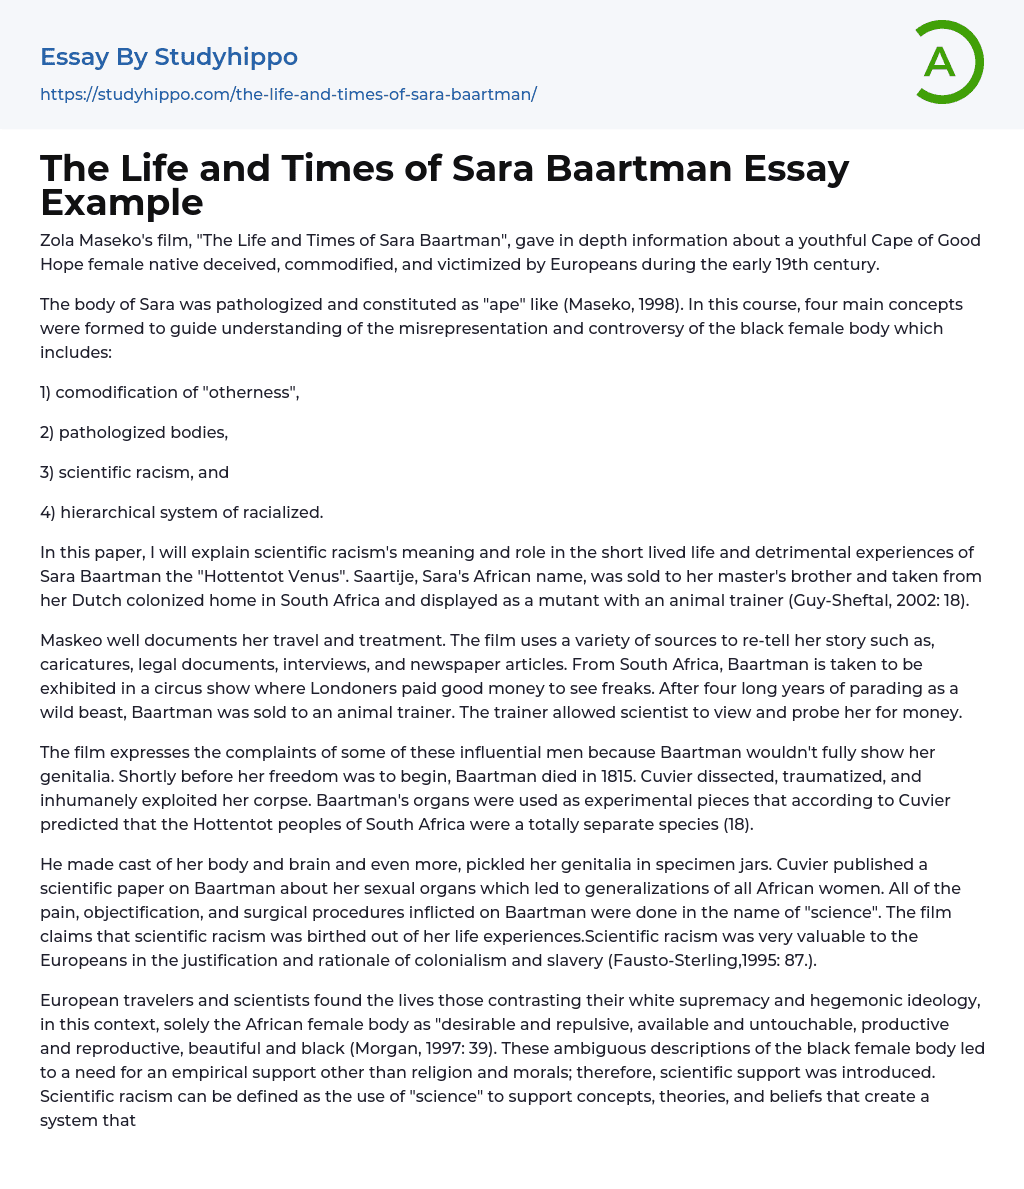 The Life and Times of Sara Baartman Essay Example